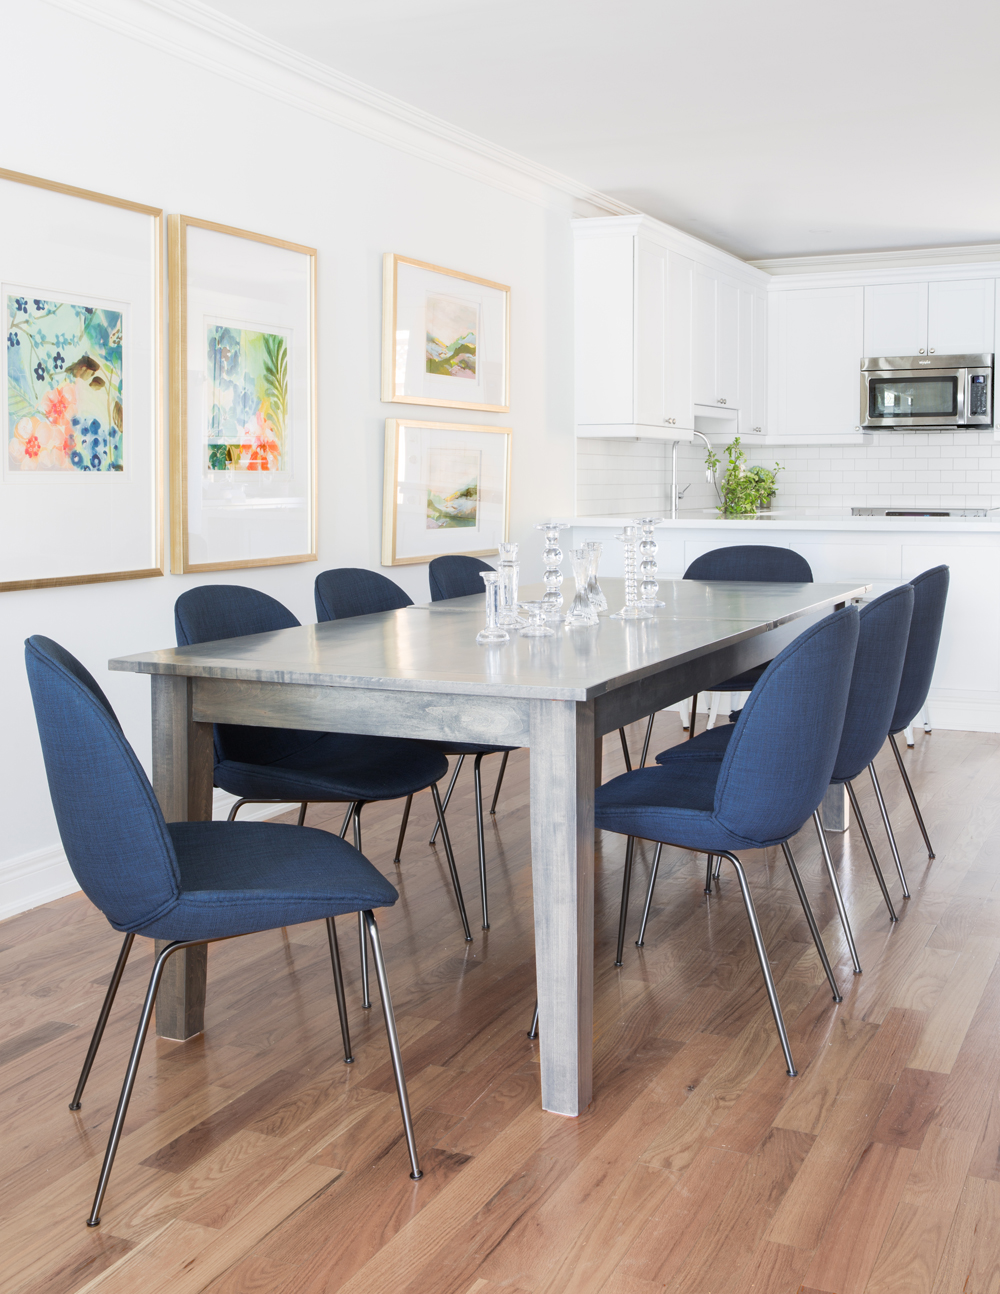 dining room table with eight blue fabric chairs with chrome legs, white kitchen in background